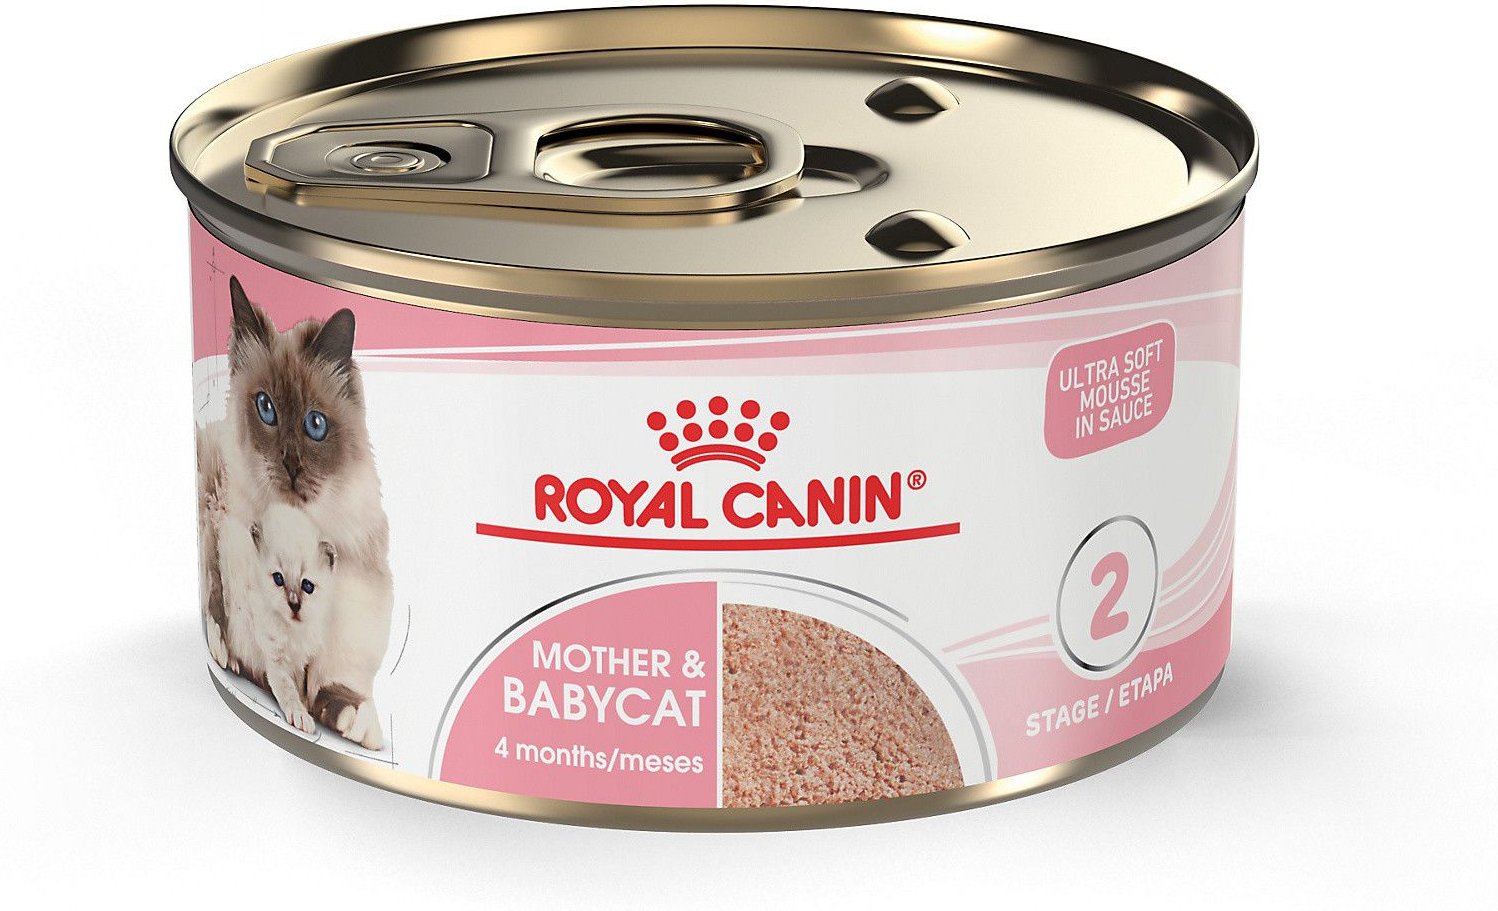 Royal Canin Mother & Babycat Ultra-Soft Mousse in Sauce